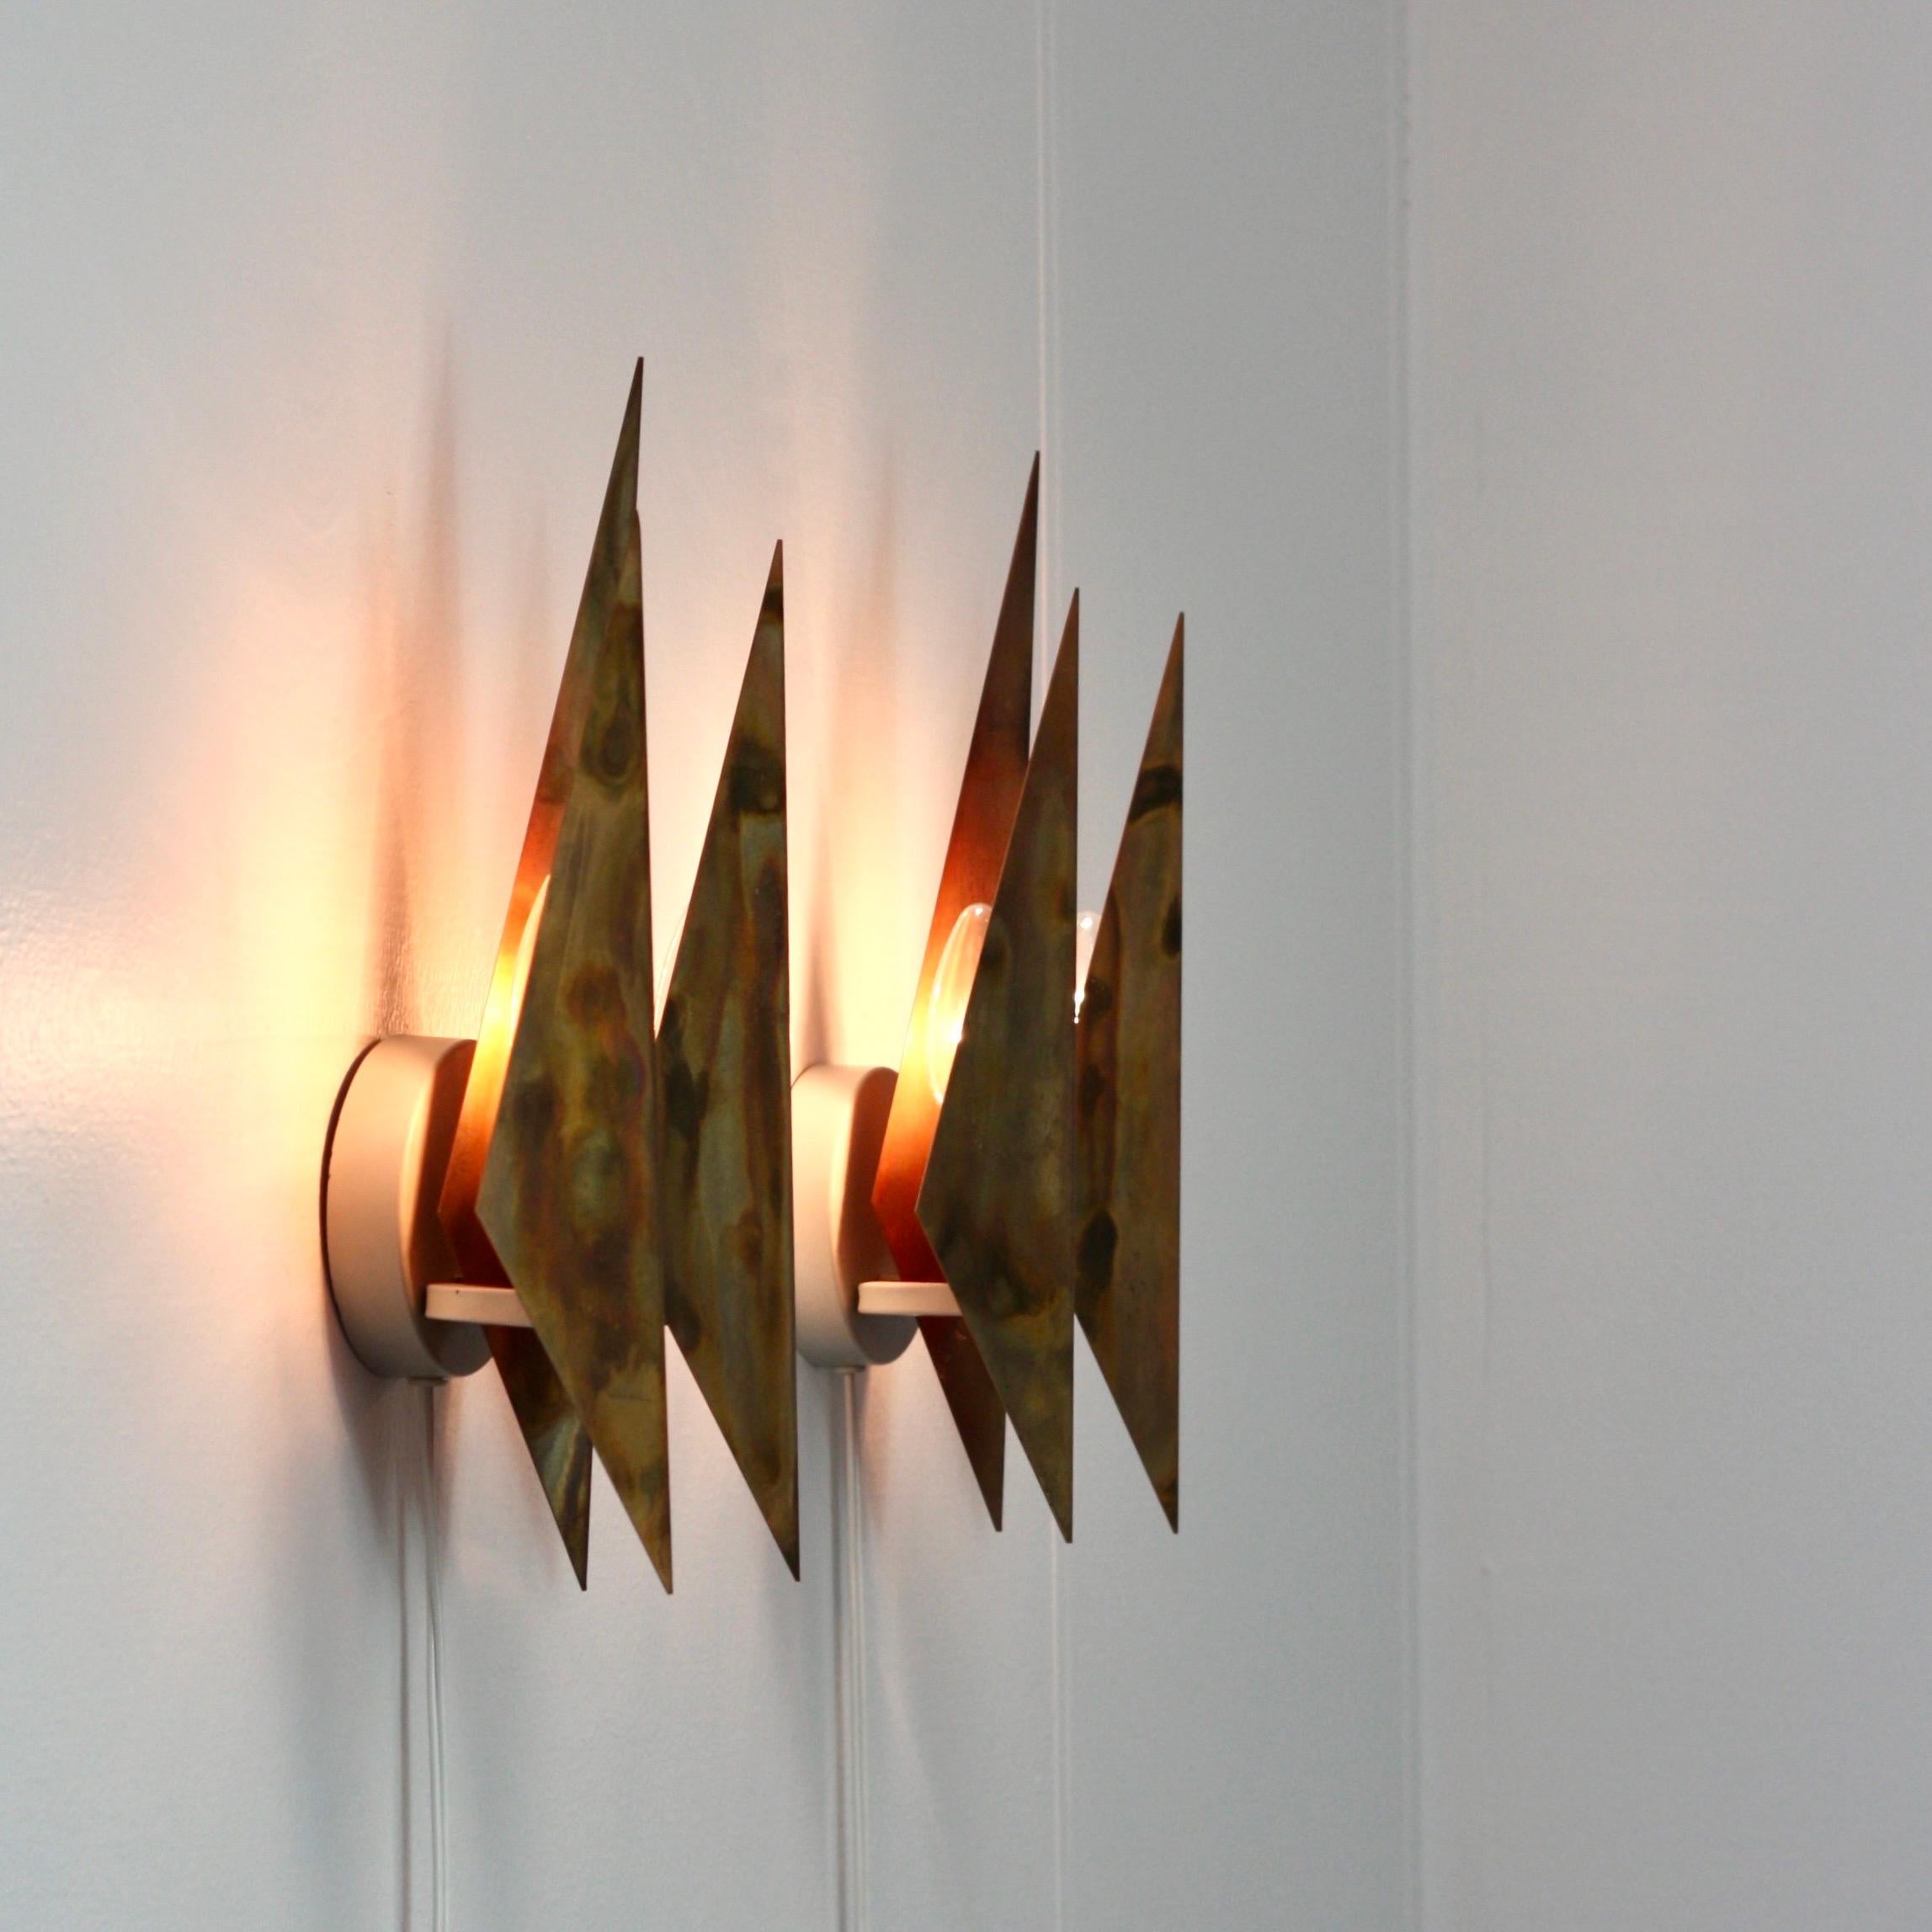 Brutalist Pair of Copper Wall Lamps by Svend Aage Holm Sorensen, 1960s, Denmark For Sale